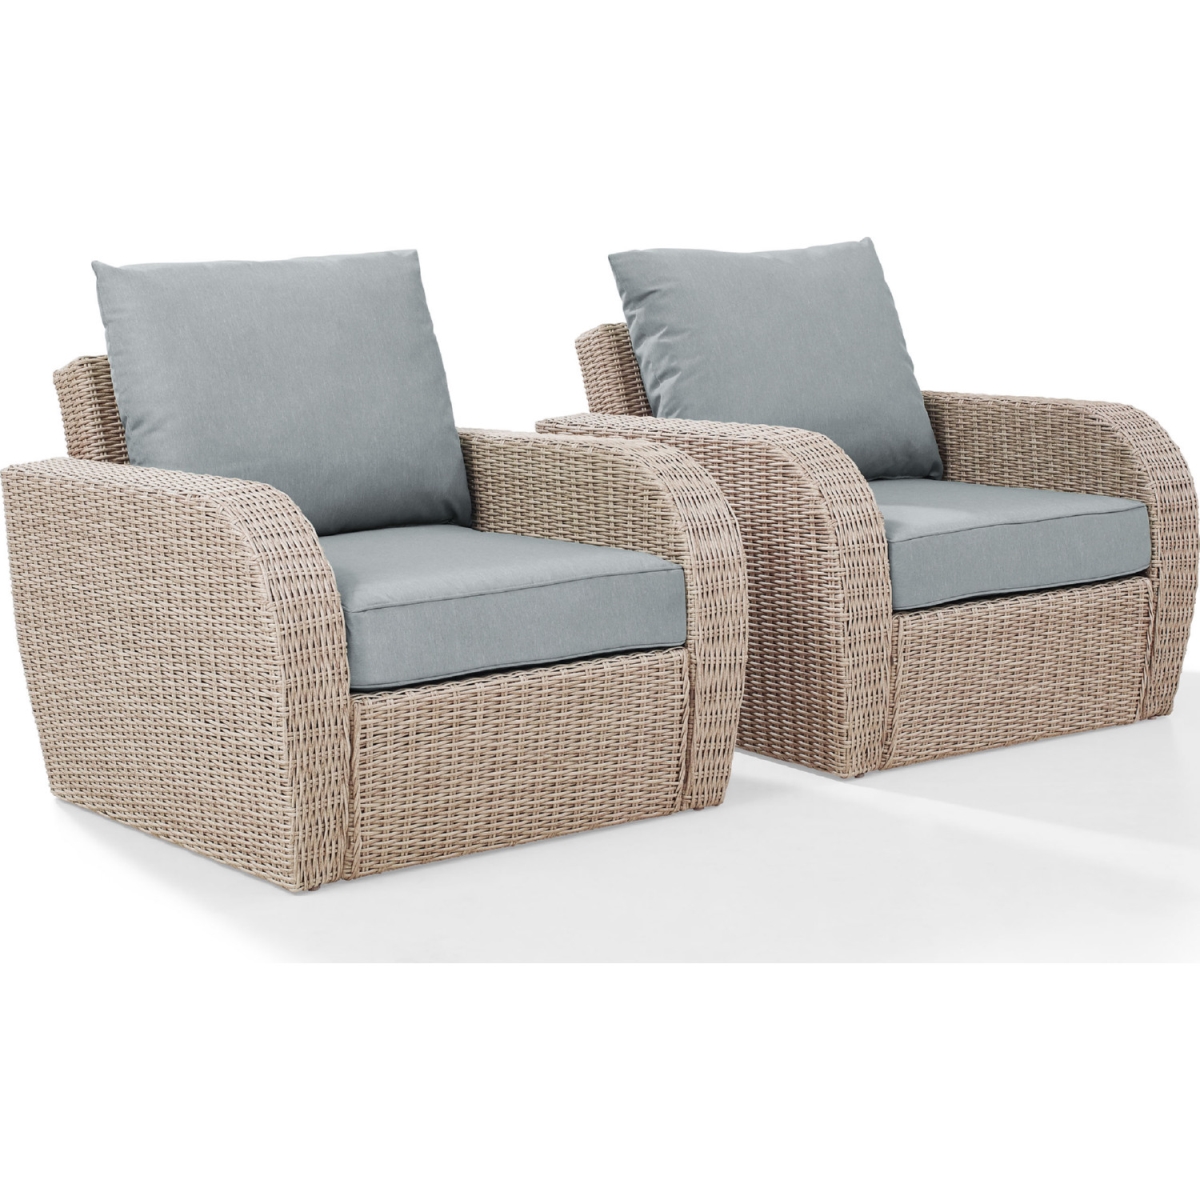 Ko70136wh-mi 2 Piece St. Augustine Outdoor Wicker Seating Set With Mist Cushion - Two Outdoor Wicker Chairs